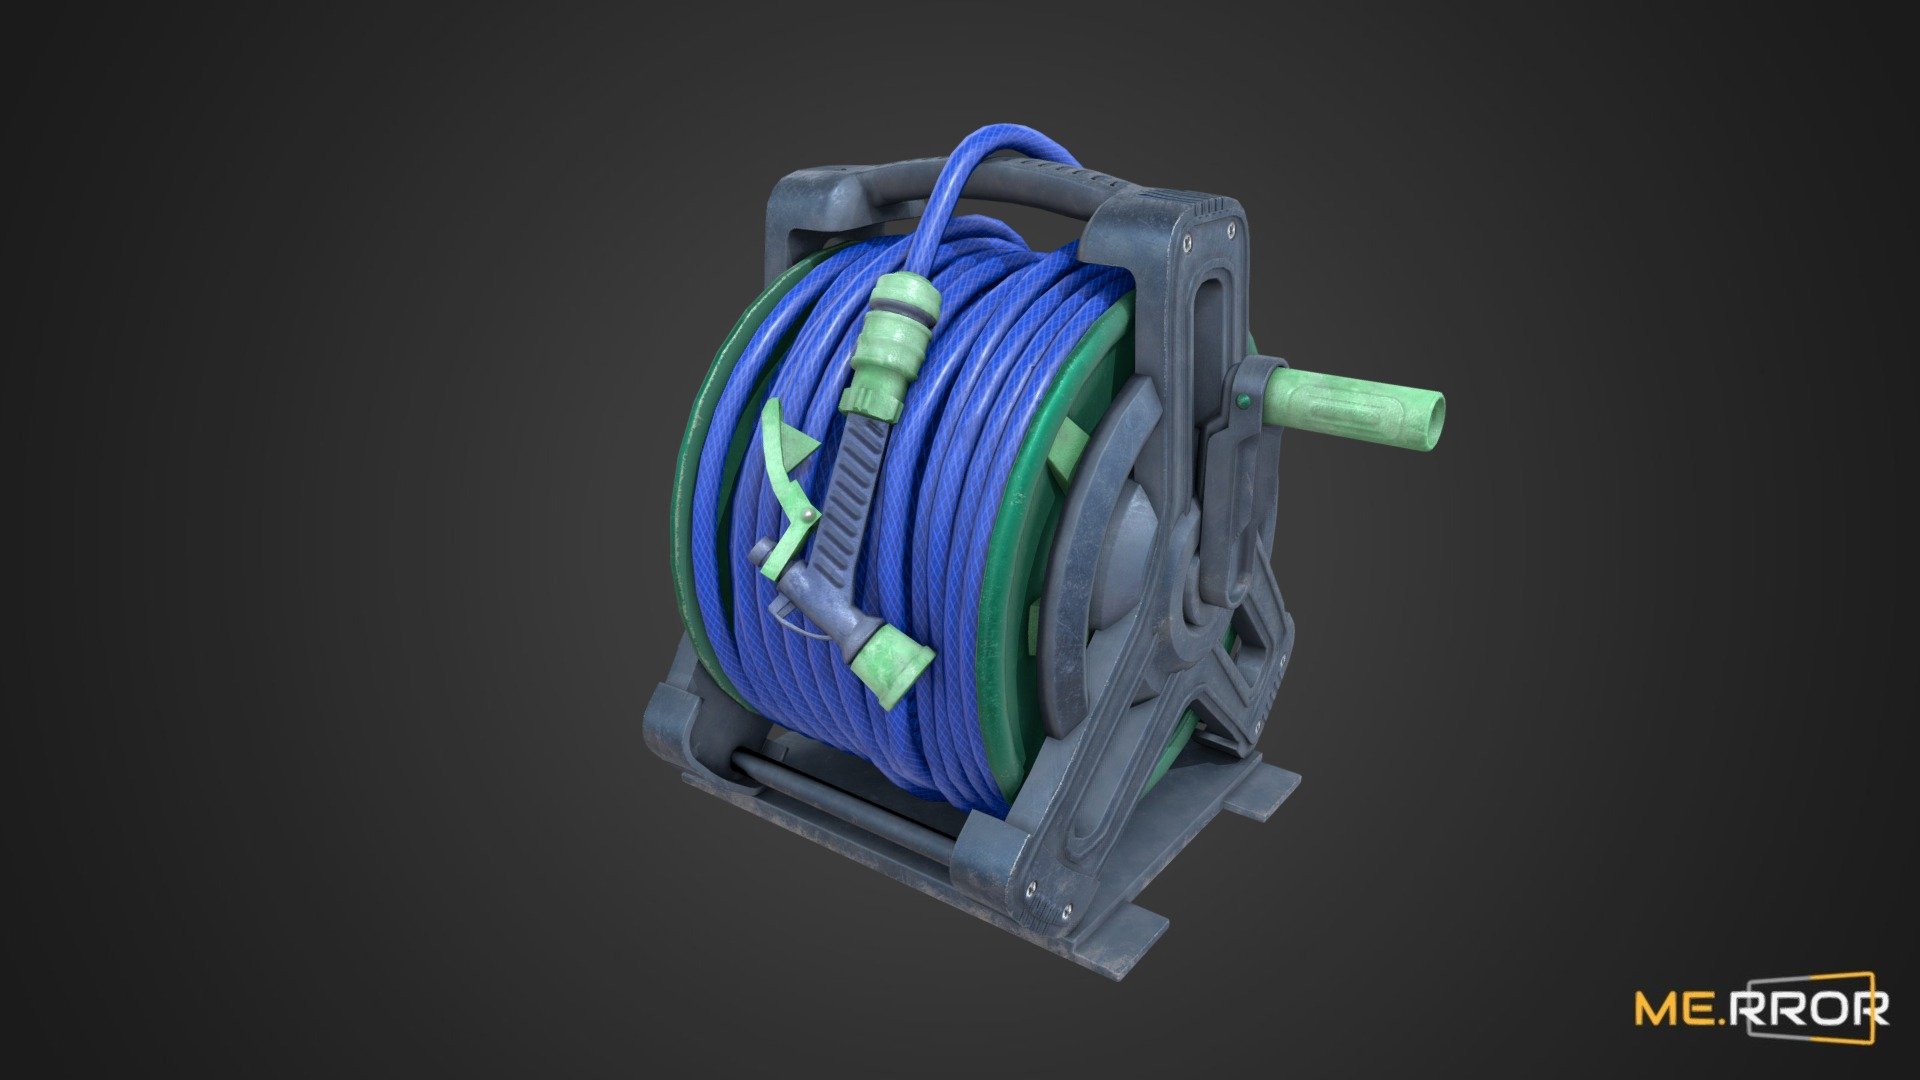 MERROR is a 3D Content PLATFORM which introduces various Asian assets to the 3D world


3DScanning #Photogrametry #ME.RROR - [Game-Ready] Hose Reel - Buy Royalty Free 3D model by ME.RROR (@merror) 3d model